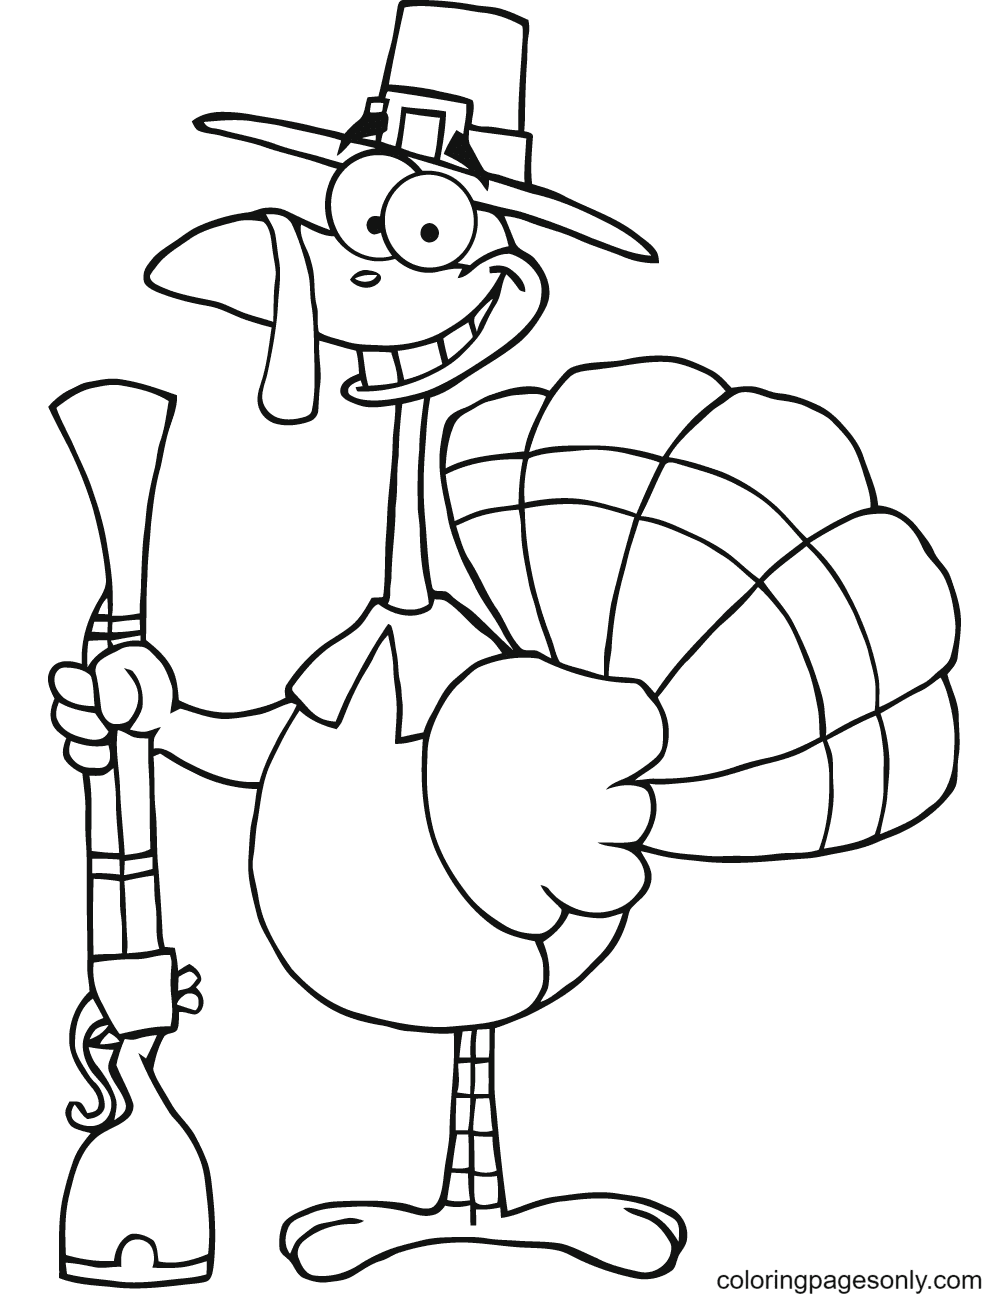 Happy Turkey with Pilgrim Hat and Musket from Turkey